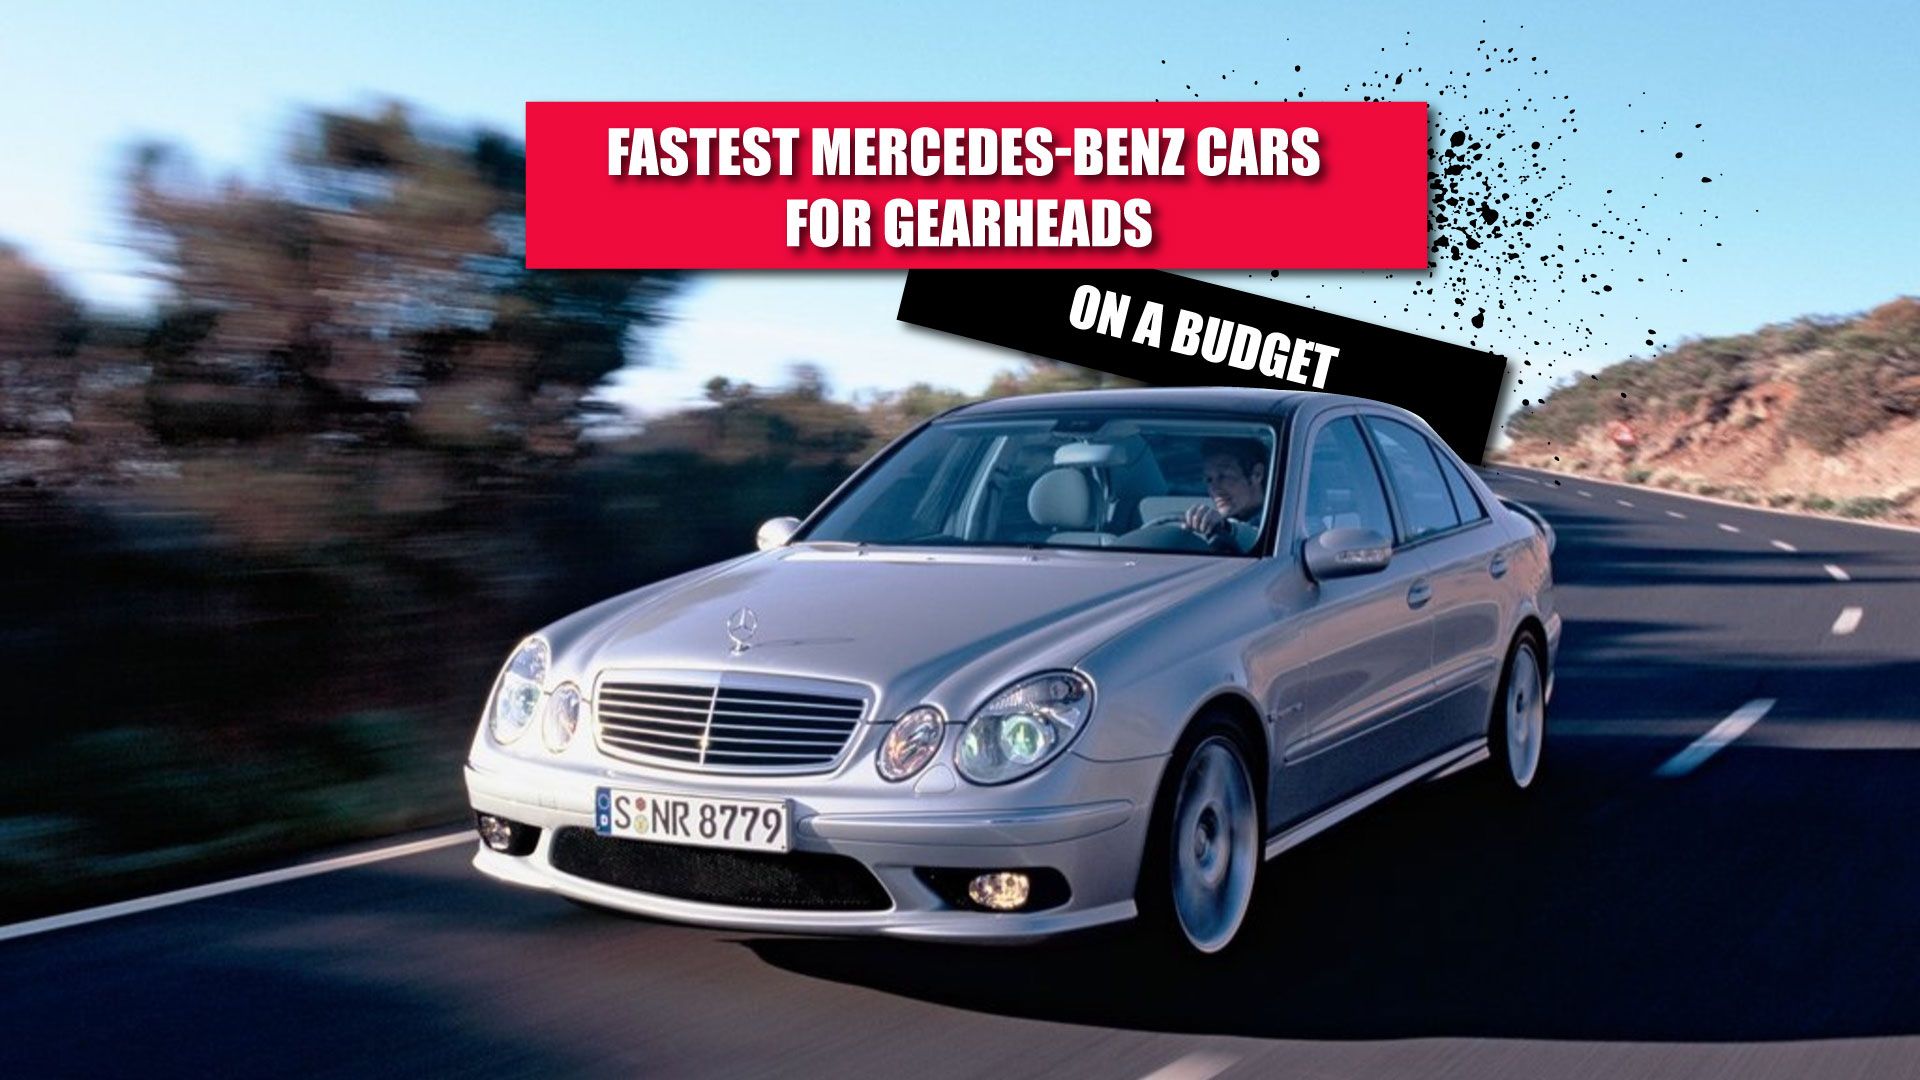 Mercedes E55 AMG Featured Image